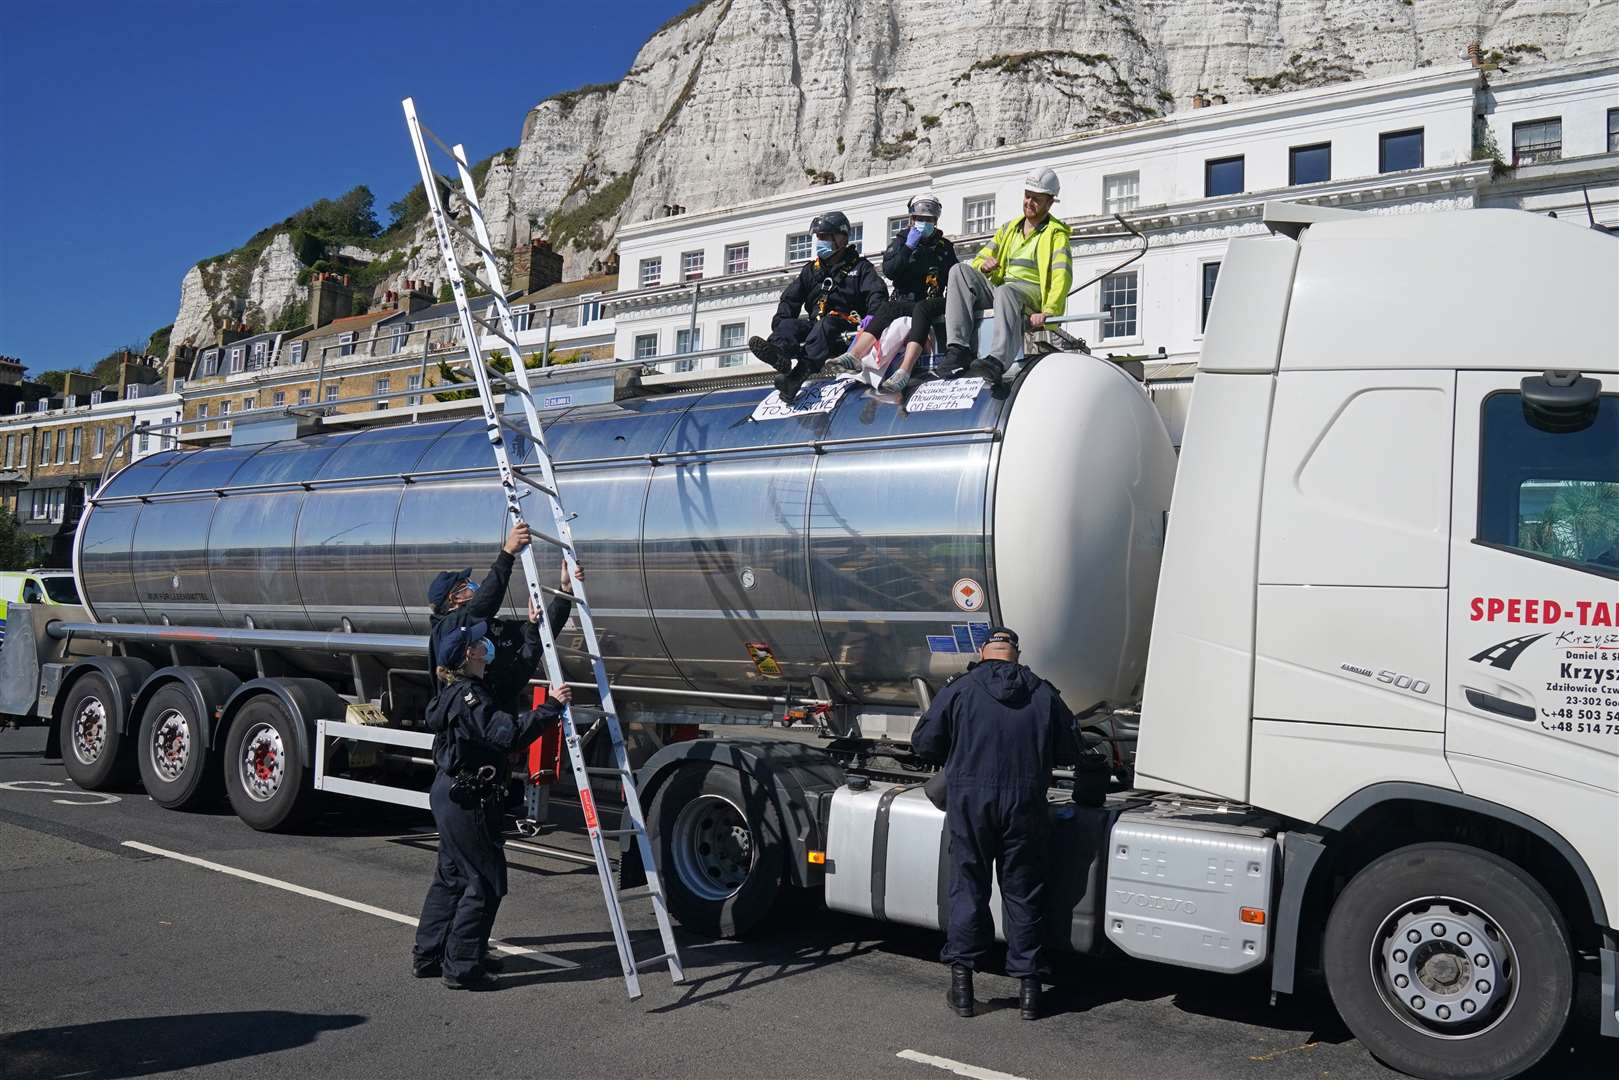 Police officers remove two protesters from the top of a tanker (Gareth Fuller/PA)